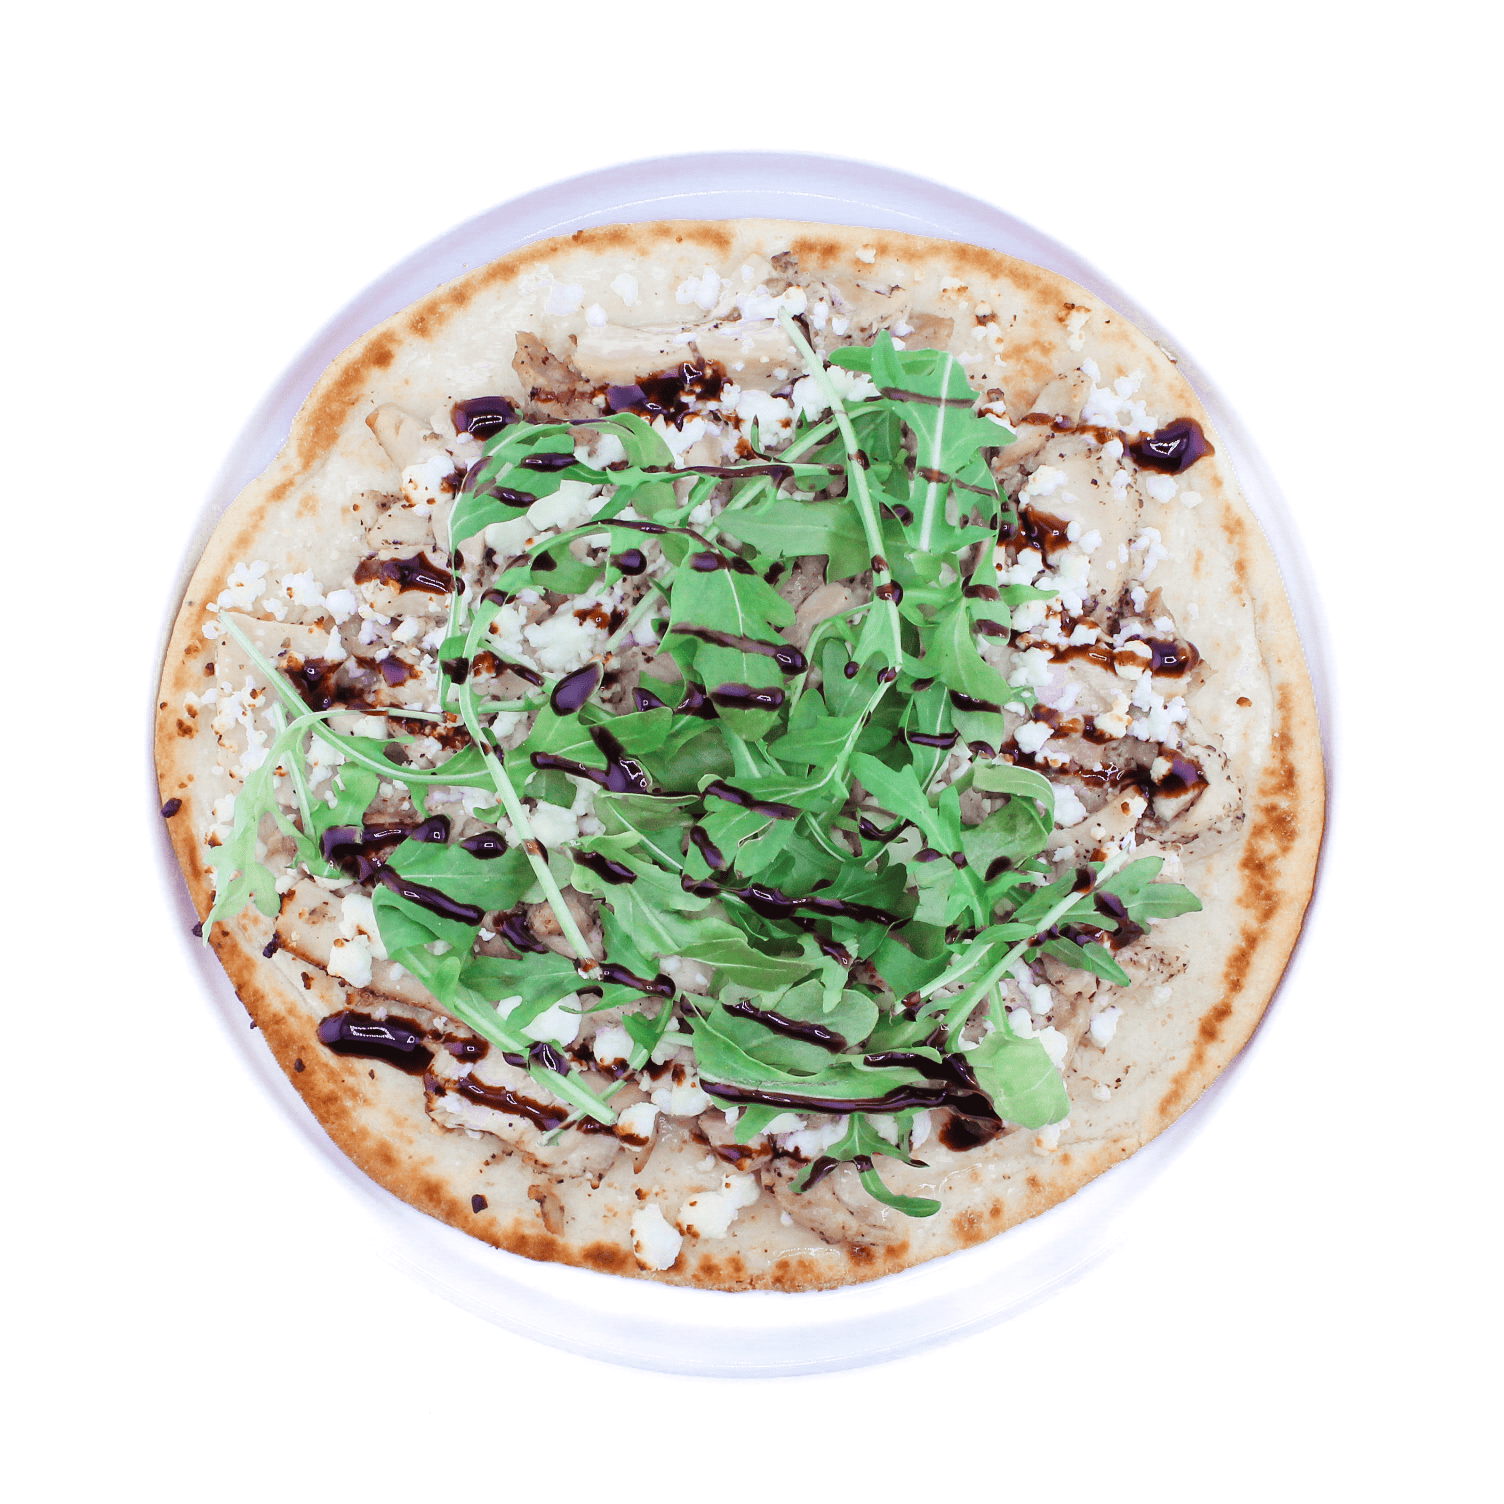 Chicken & the Goat - Chicken, goat cheese, pickled red onions, arugula, balsamic vinaigrette, whole wheat flatbread